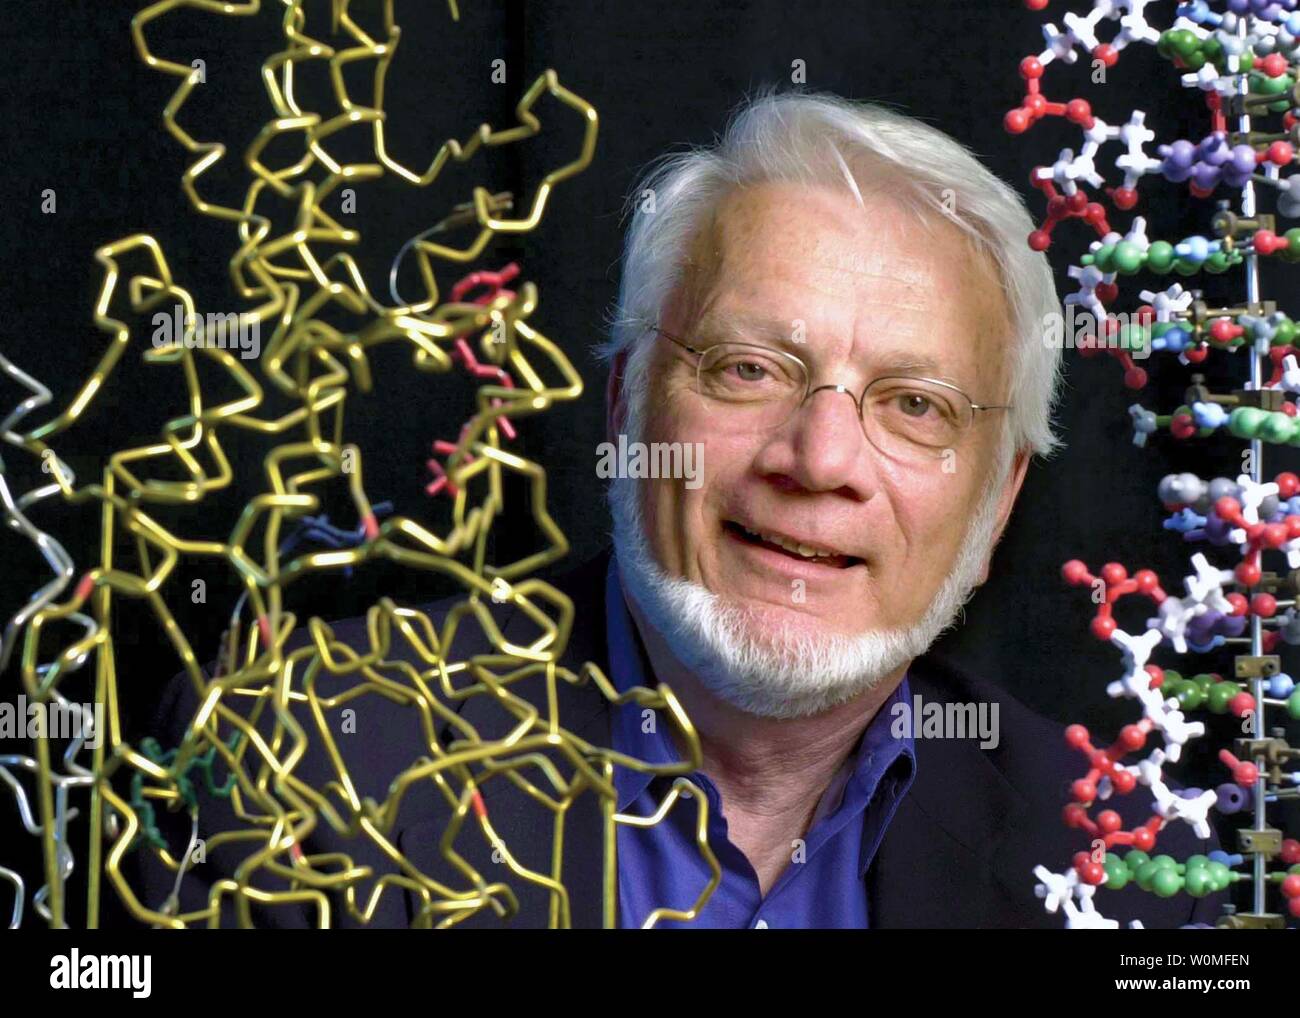 Thomas Steitz, Sterling professor of molecular biophysics and biochemistry and professor of chemistry at Yale University, is one of three winners of the 2009 Nobel Prize in Chemistry for his work describing the structure and function of the ribosome, the protein making factory key to the function of all life, the Nobel Assembly at the Karolinska Institute in Sweden announced October 7, 2009. UPI/Yale University Stock Photo